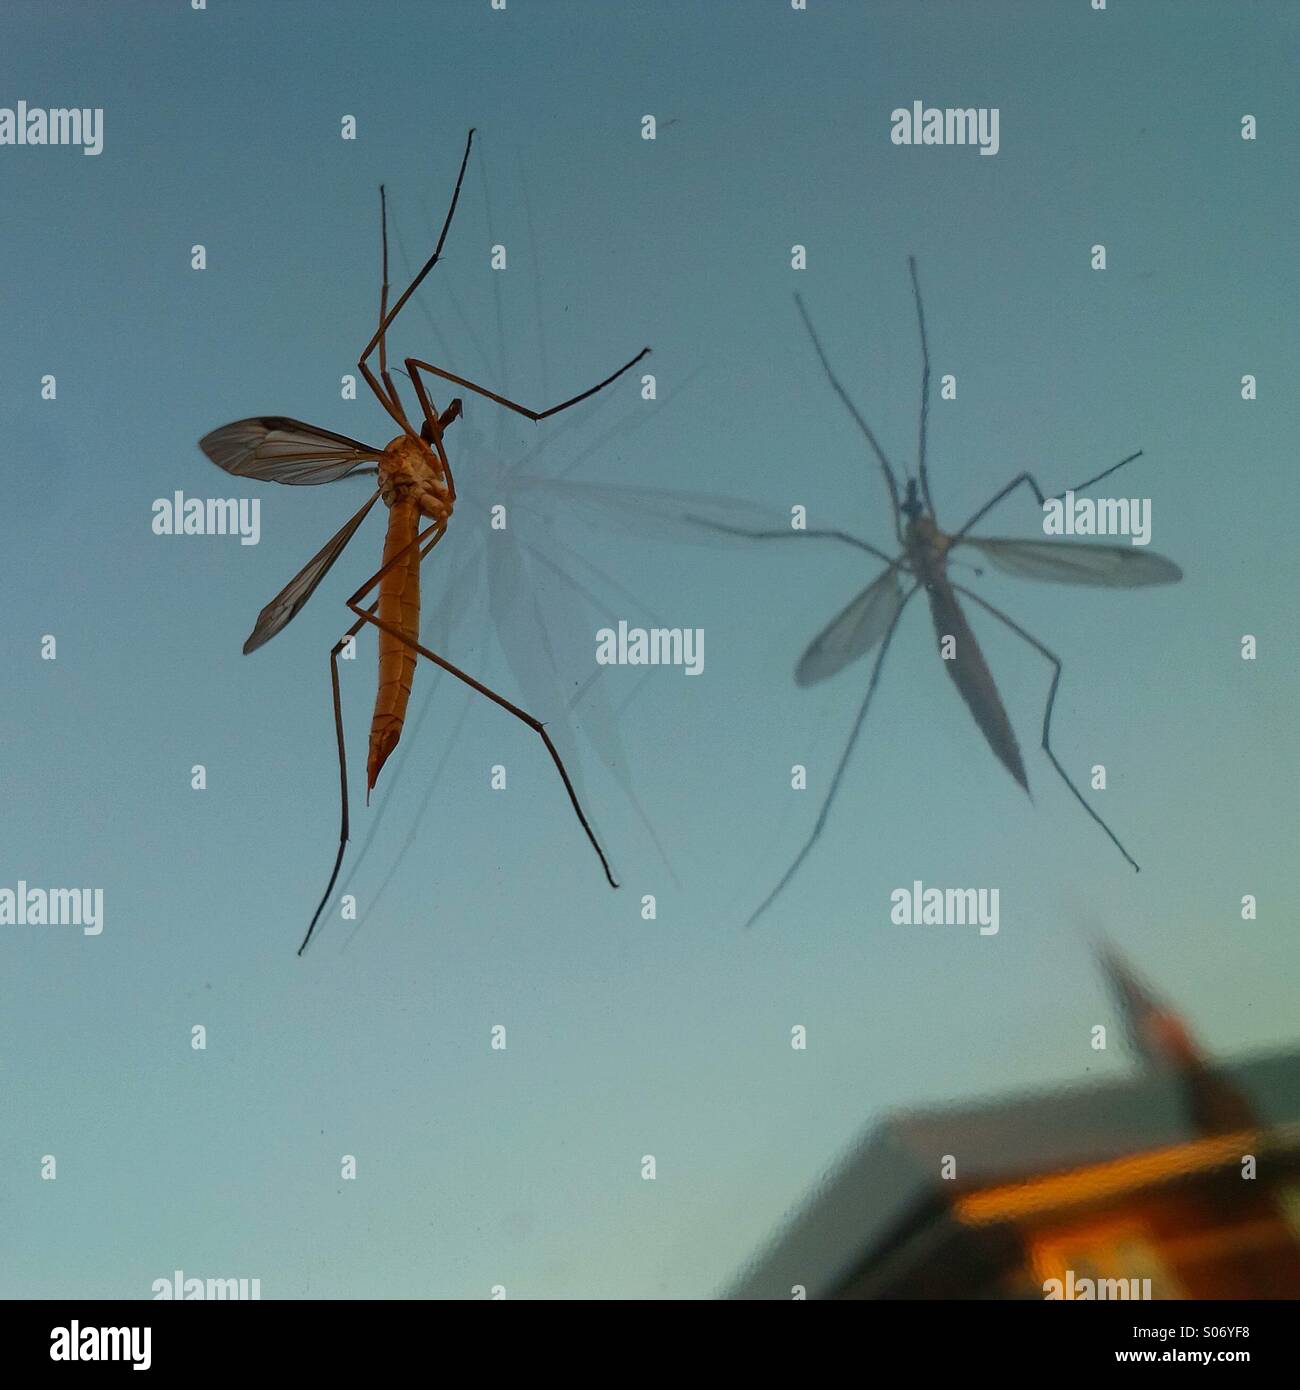 Crane fly, also known as a daddy longlegs, on a reflective window late on an autumnal evening in London. Stock Photo